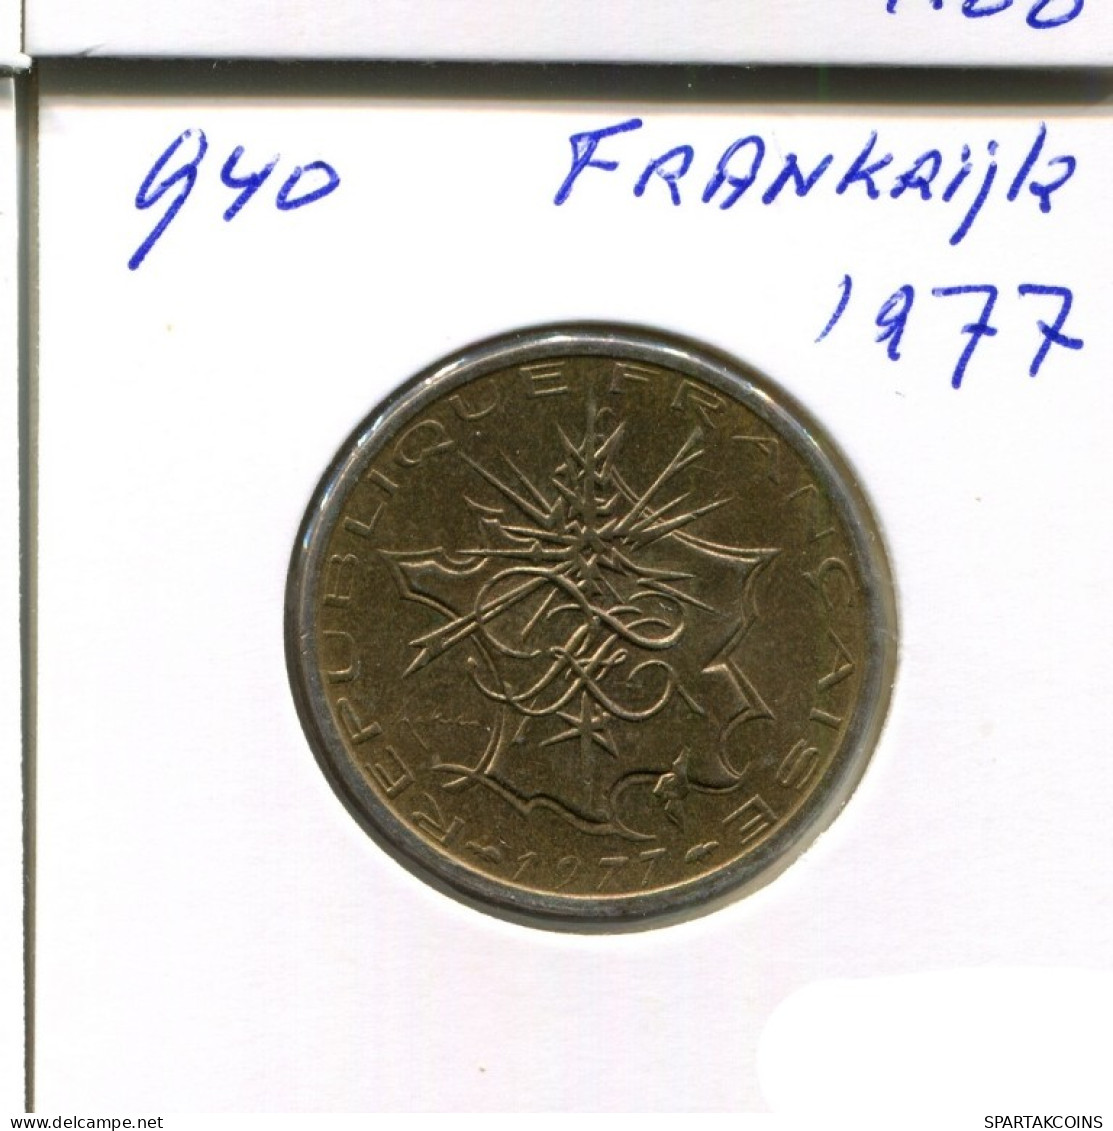 10 FRANCS 1977 FRANCE Coin French Coin #AN437.U.A - 10 Francs